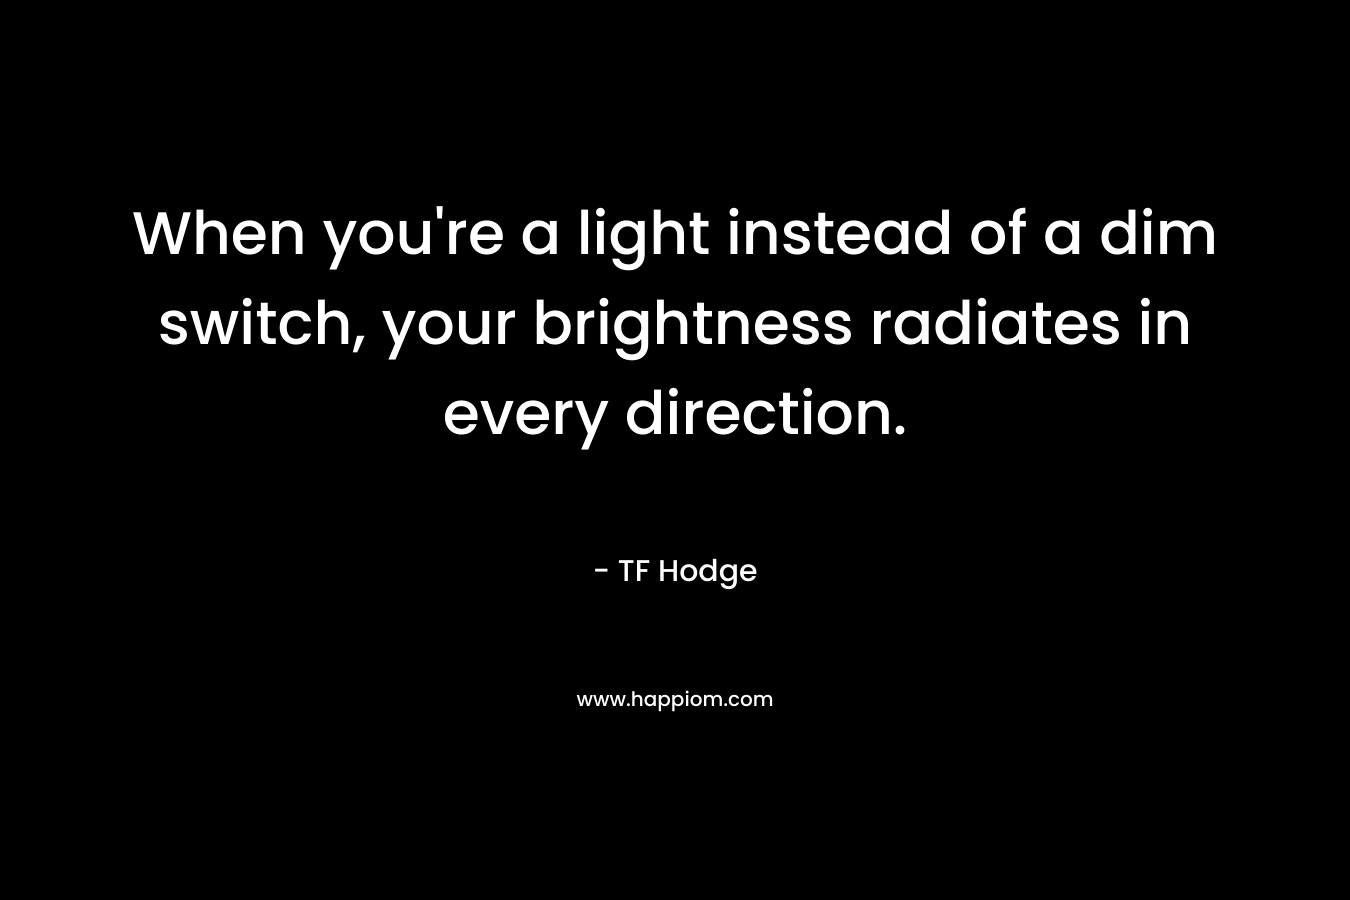 When you’re a light instead of a dim switch, your brightness radiates in every direction. – TF Hodge